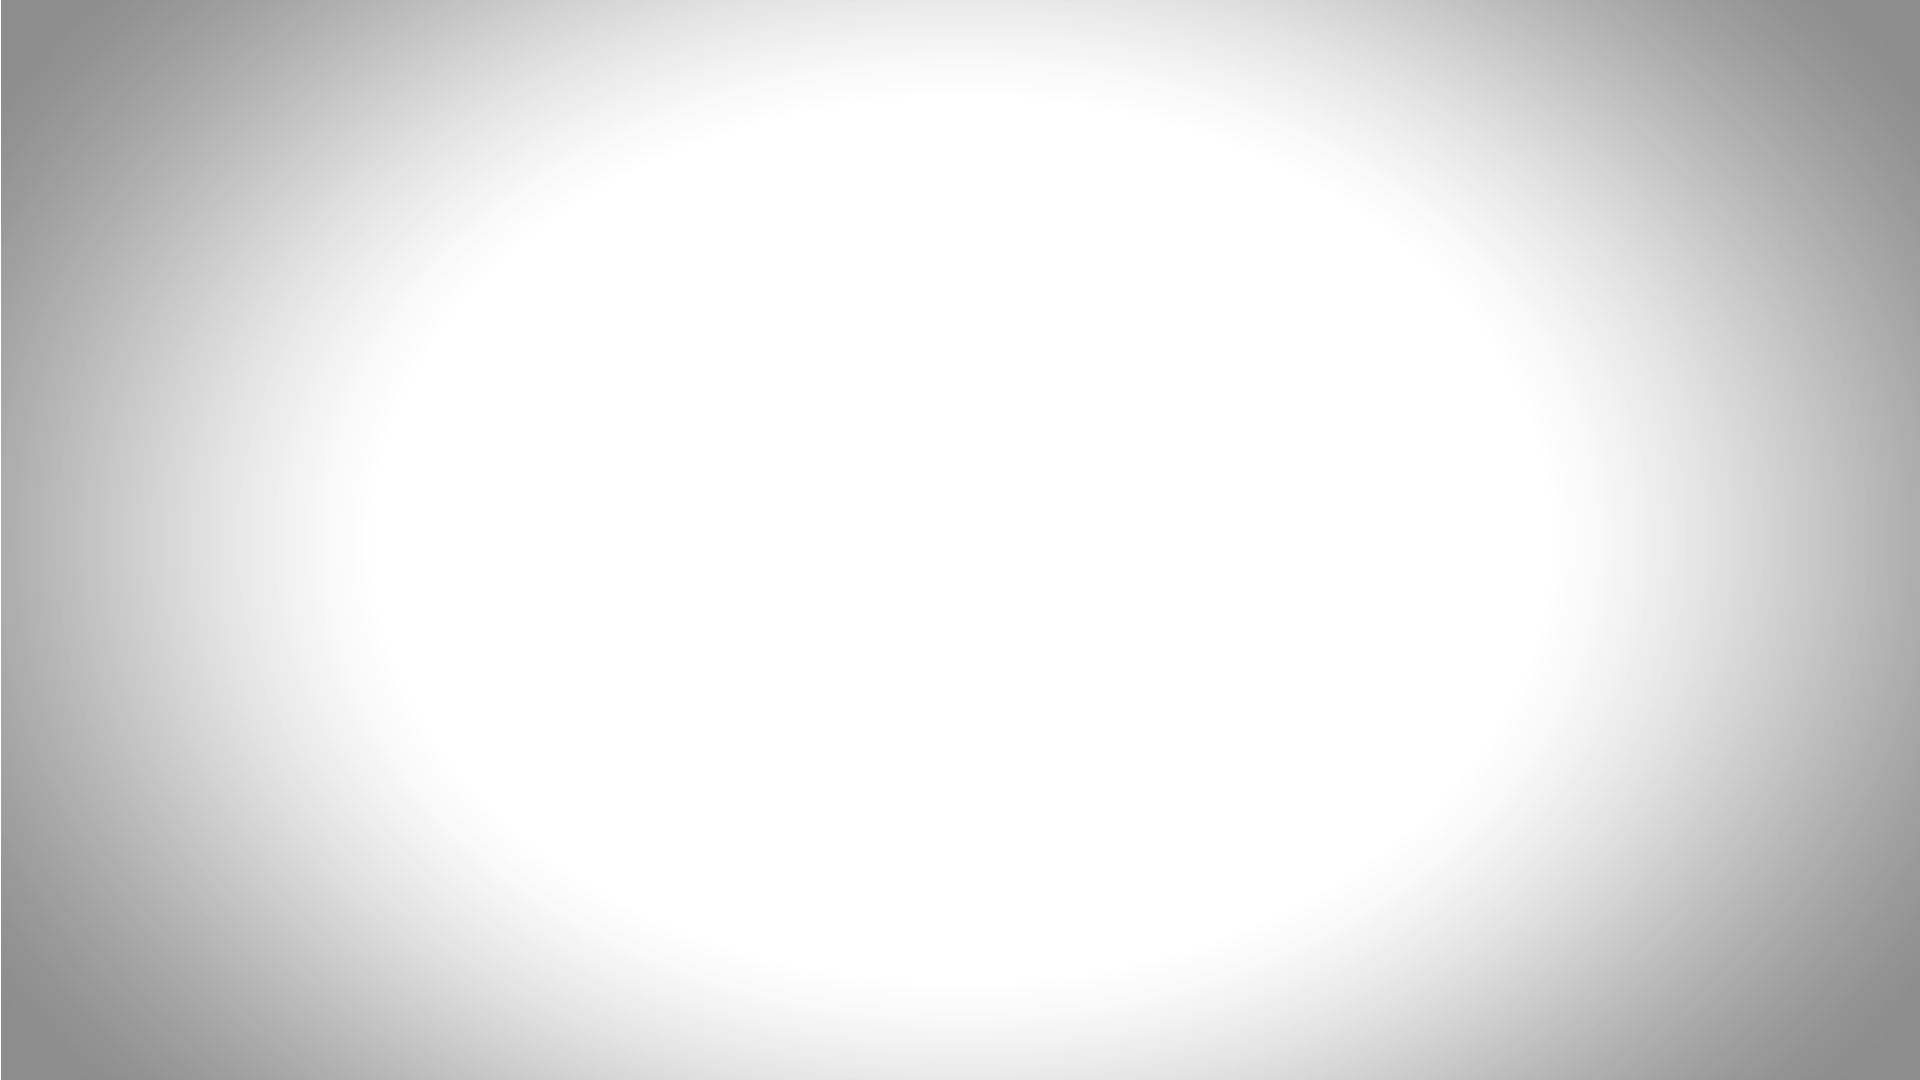 Download Gradient - White Gradient Circle Png PNG Image with No Background  